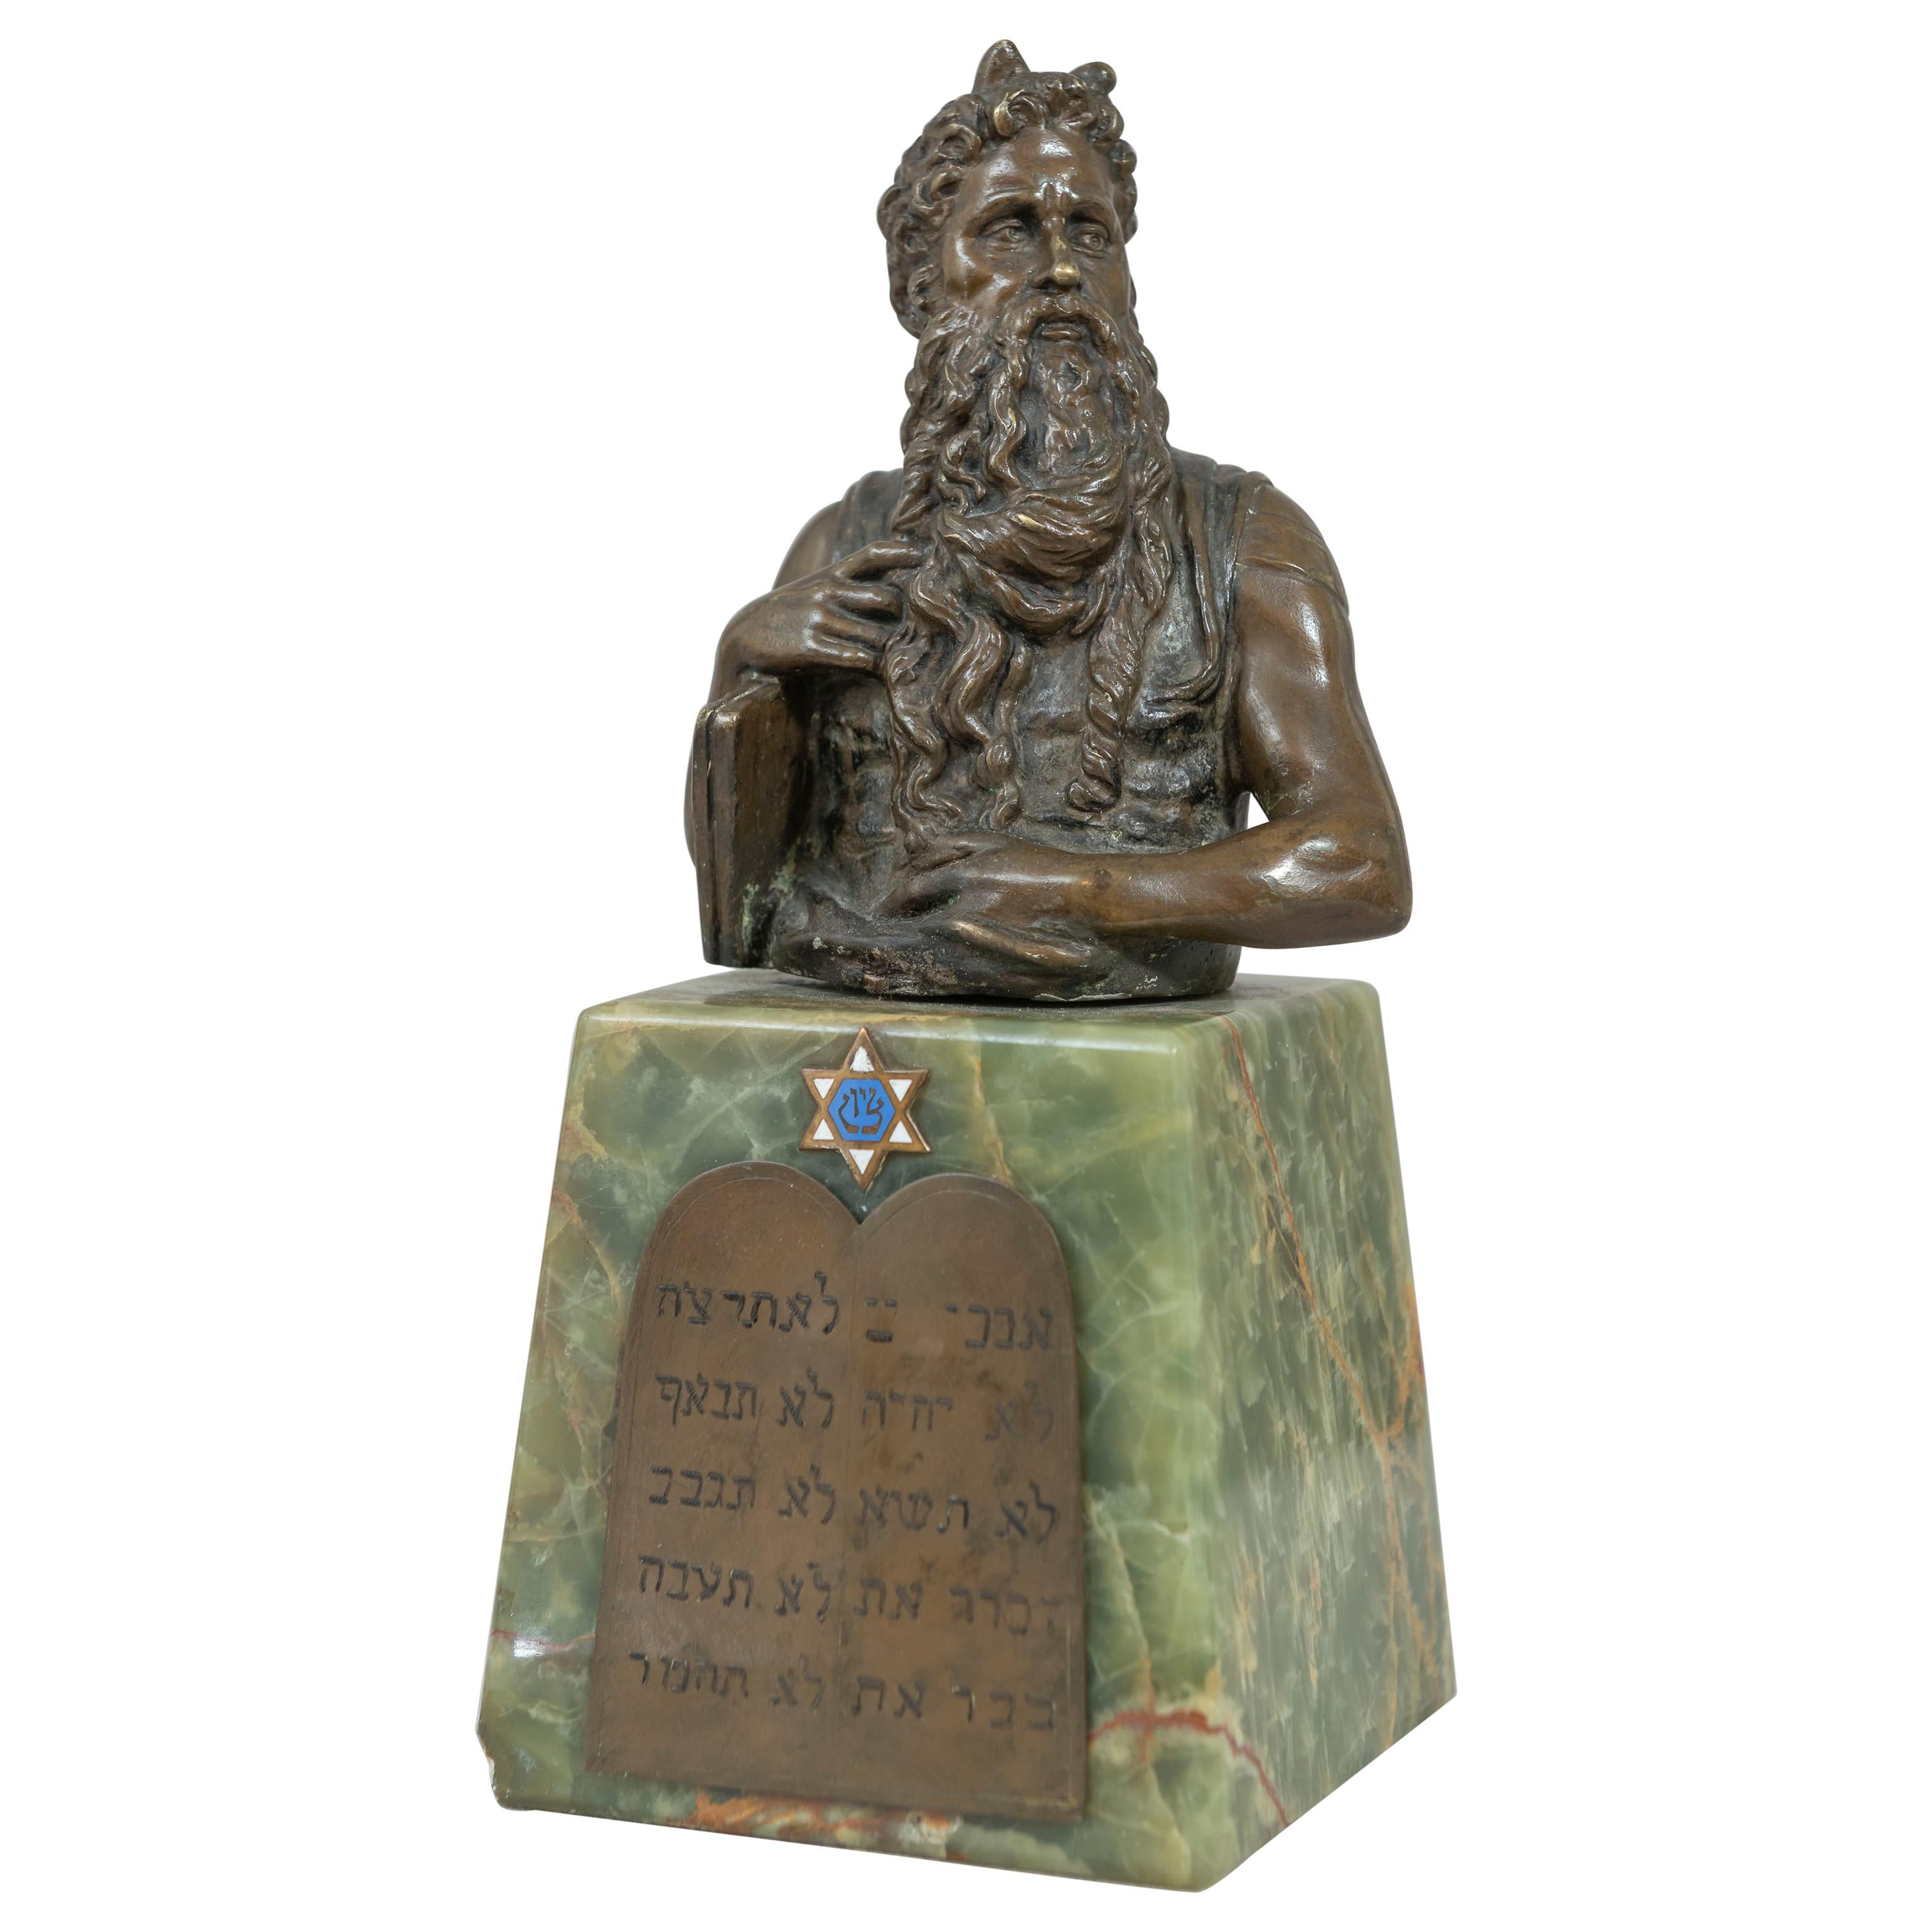 Antique Bronze Bust of Moses Mounted on Onyx with Plaque of 10 Commandments